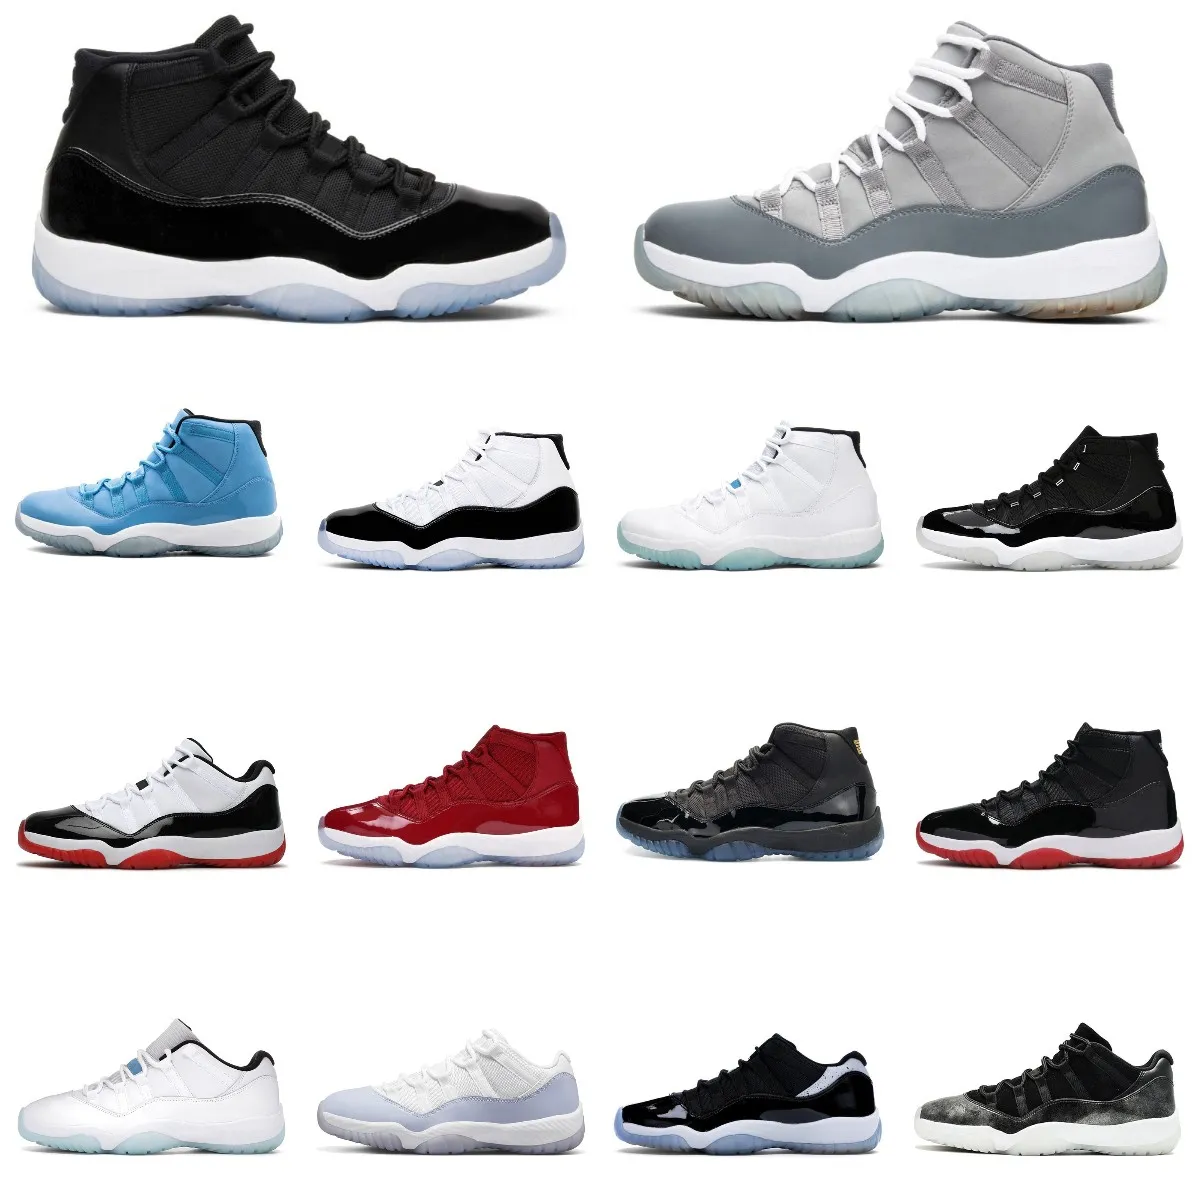 Zapatillas de baloncesto masculino 11 11s Concord Cool Gray Gown Red Legend Red Blue Space Jam Win como 96 UNC Jubilee Bred Pure Violet 72-10 Low Pantone Men Mujeres Sports Sports 36-47